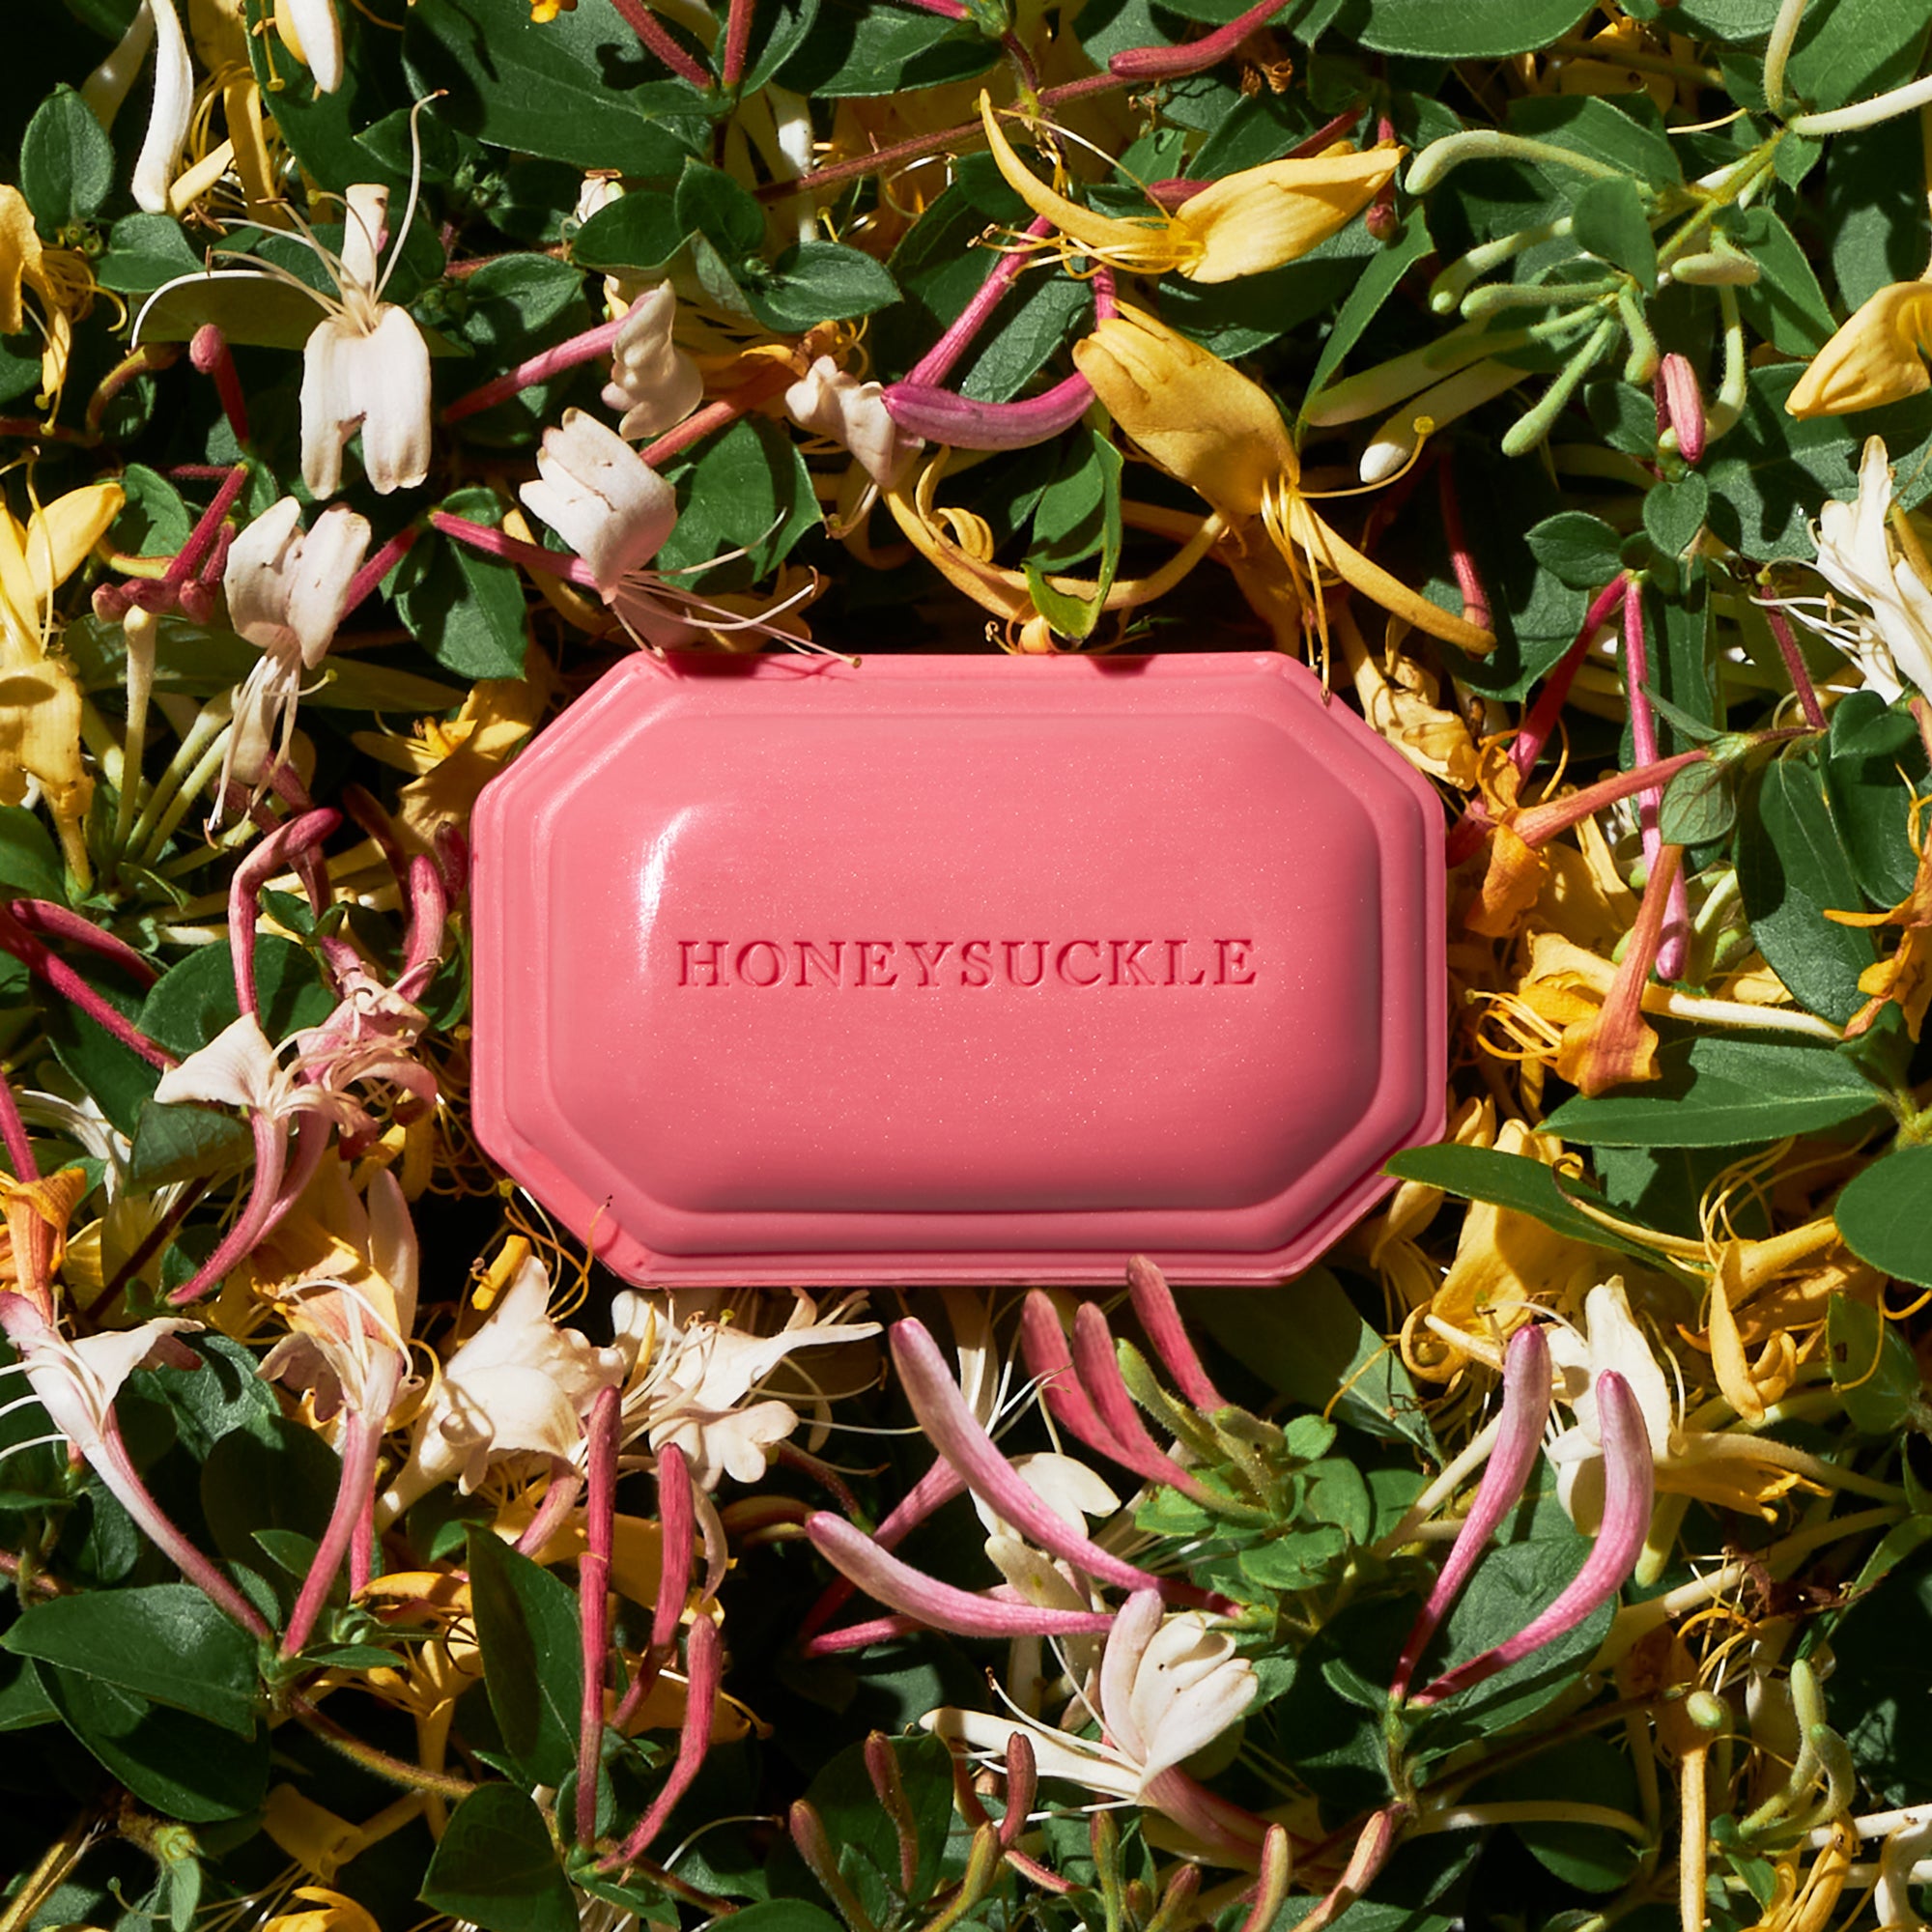 Caswell-Massey Honeysuckle Luxury Bath Soap mauve decorative shaped soap on top of bed of honeysuckle flowers